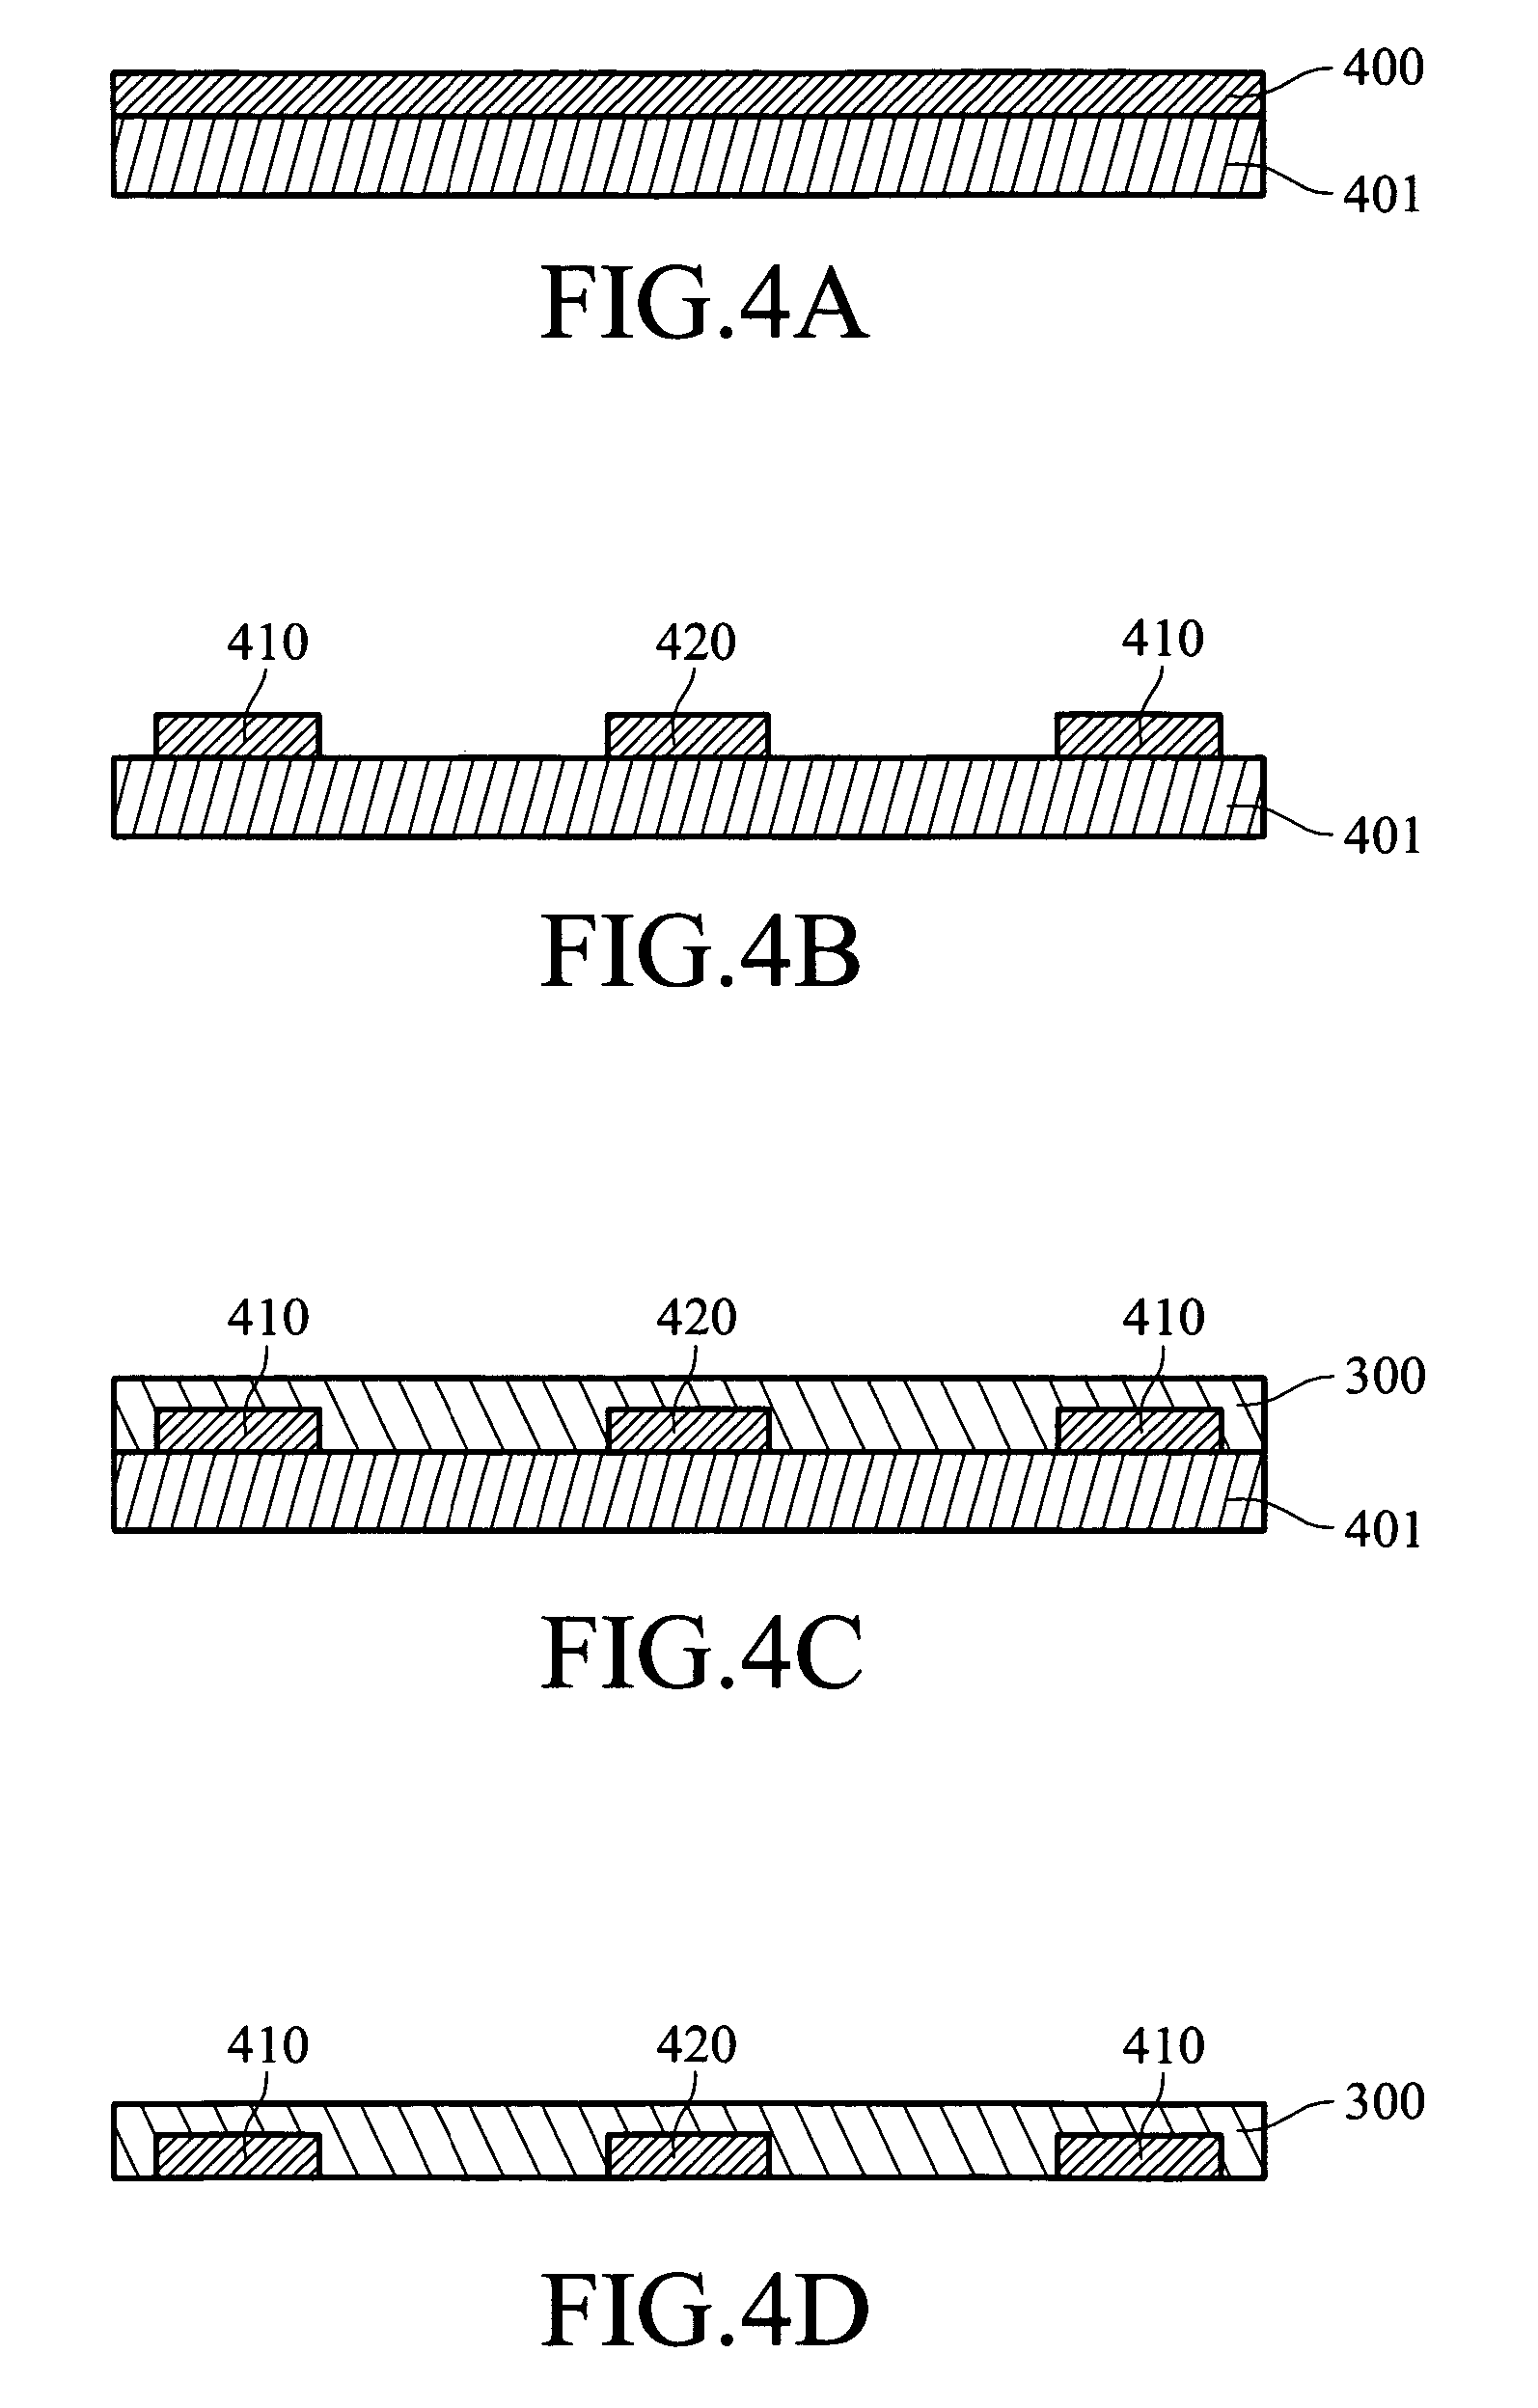 Bonding structure of device packaging